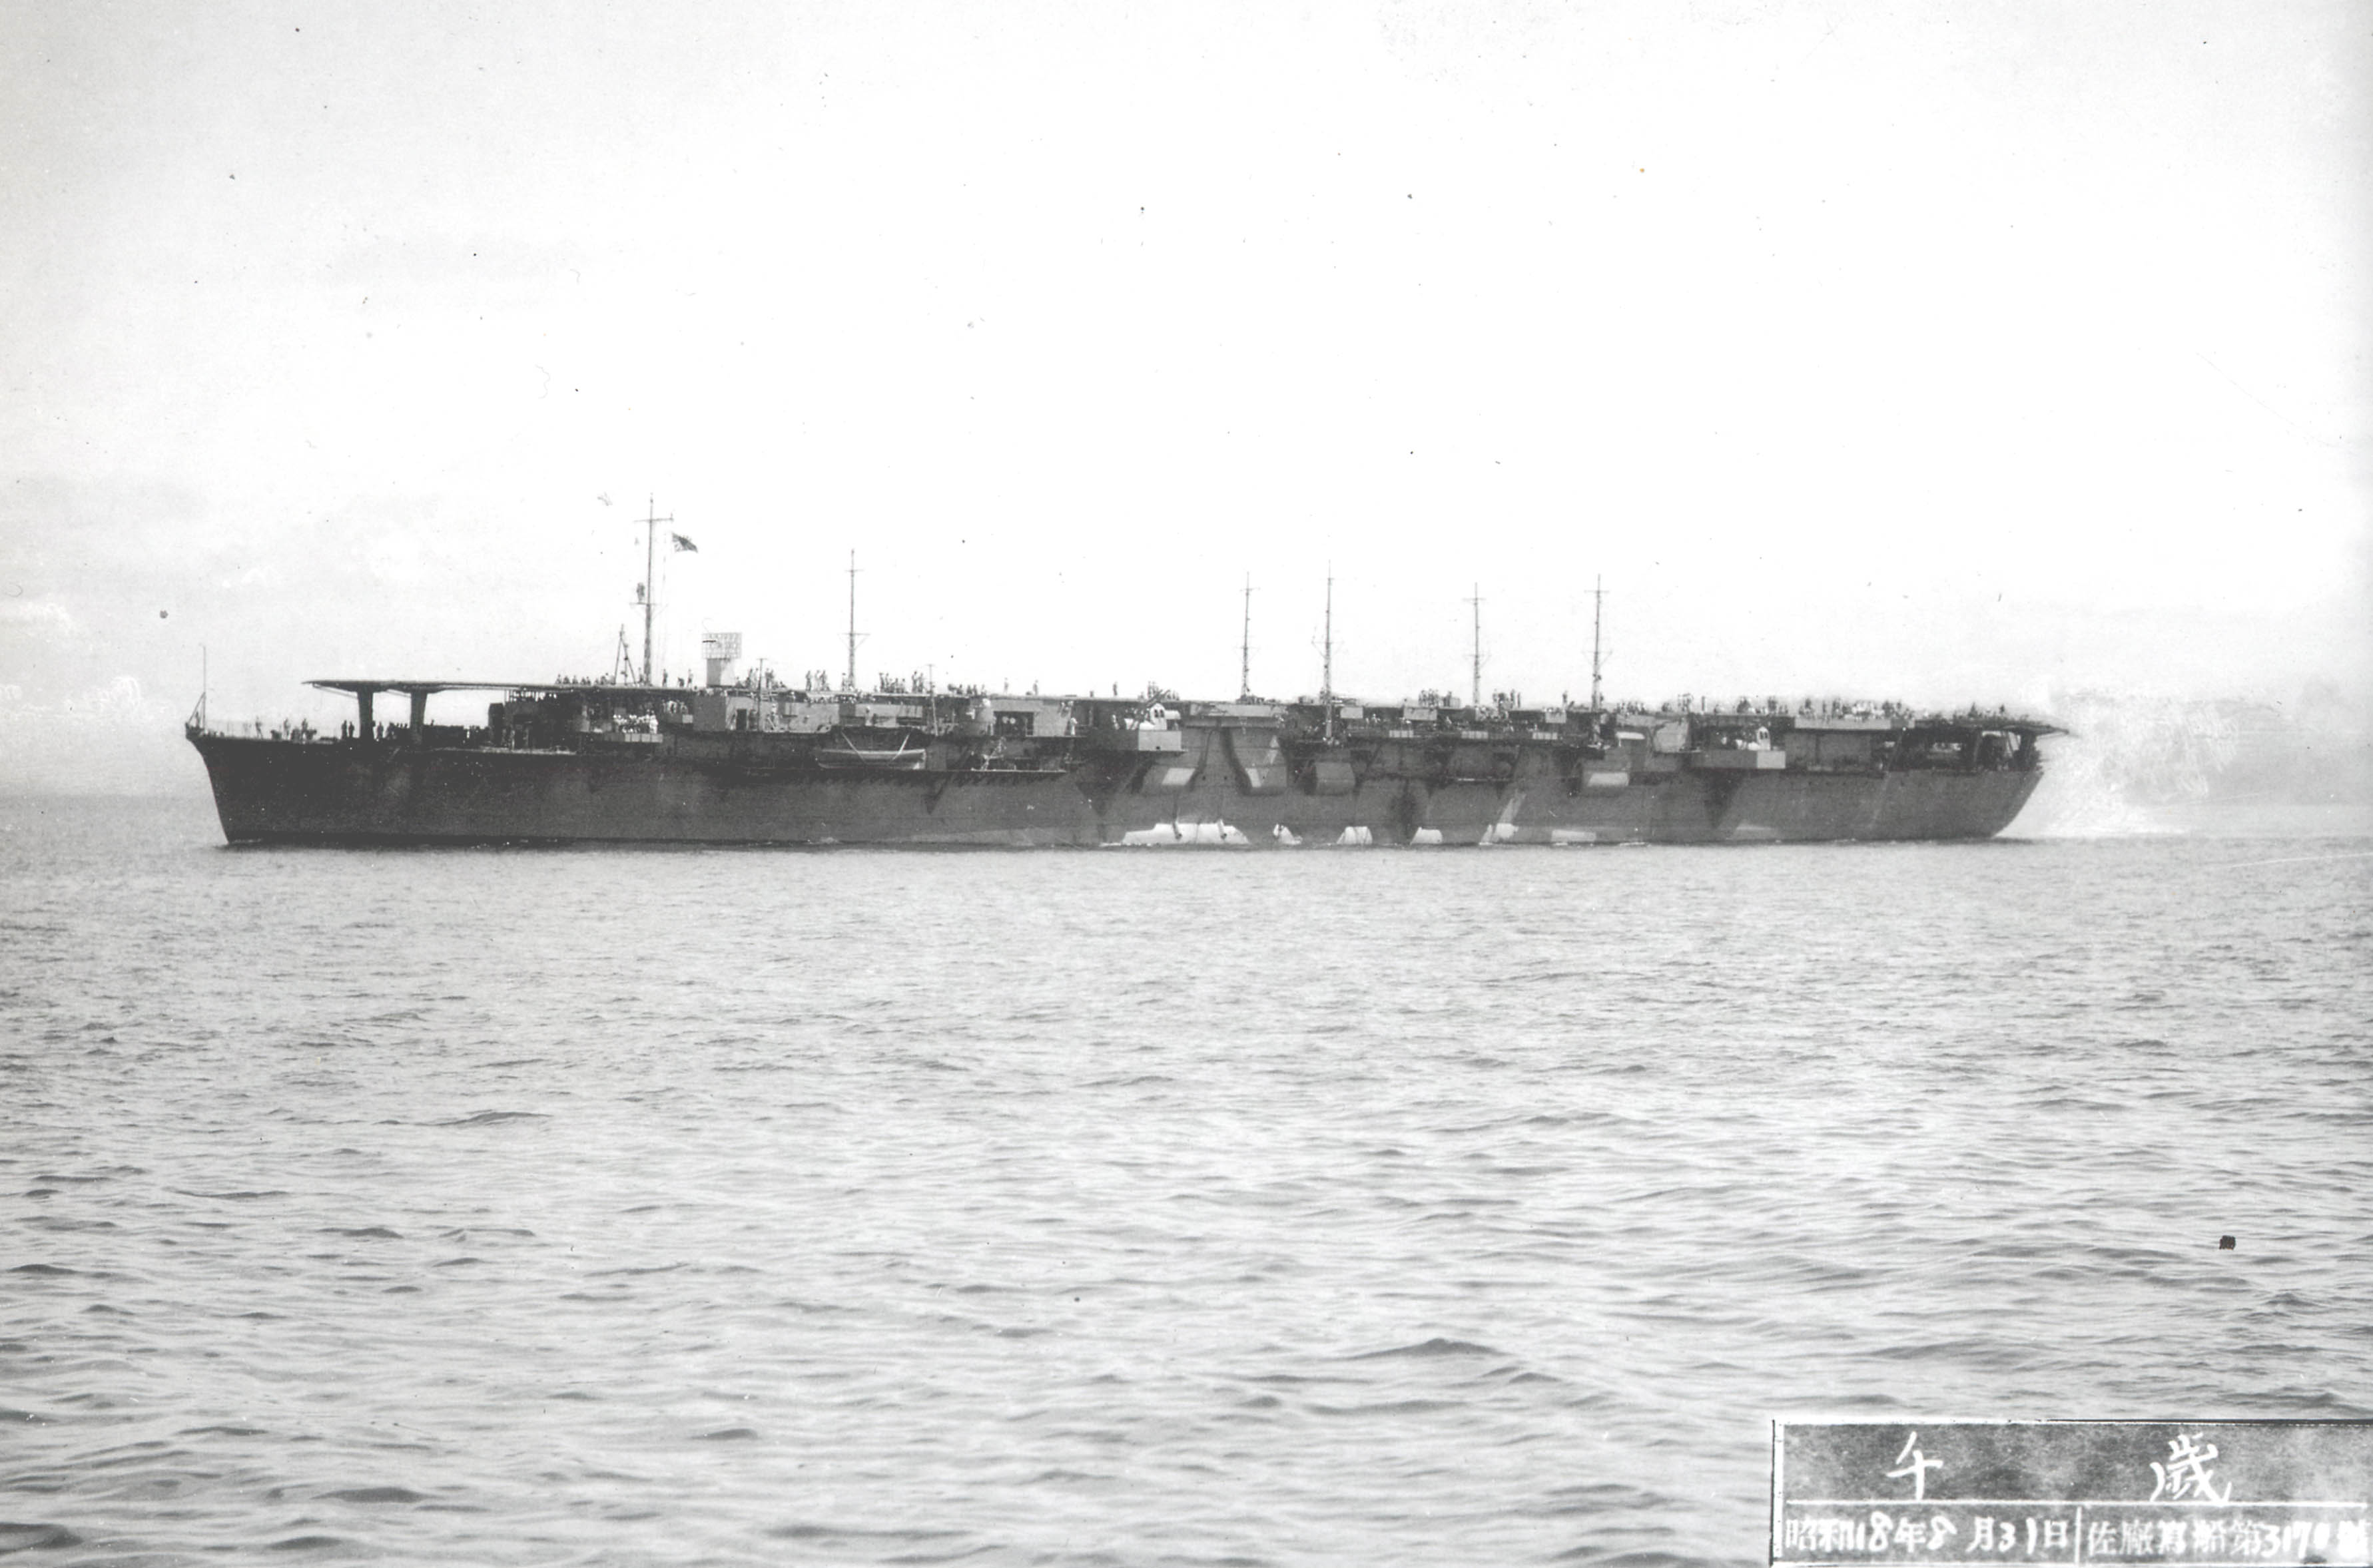 Japanese_aircraft_carrier_Chitose.jpg